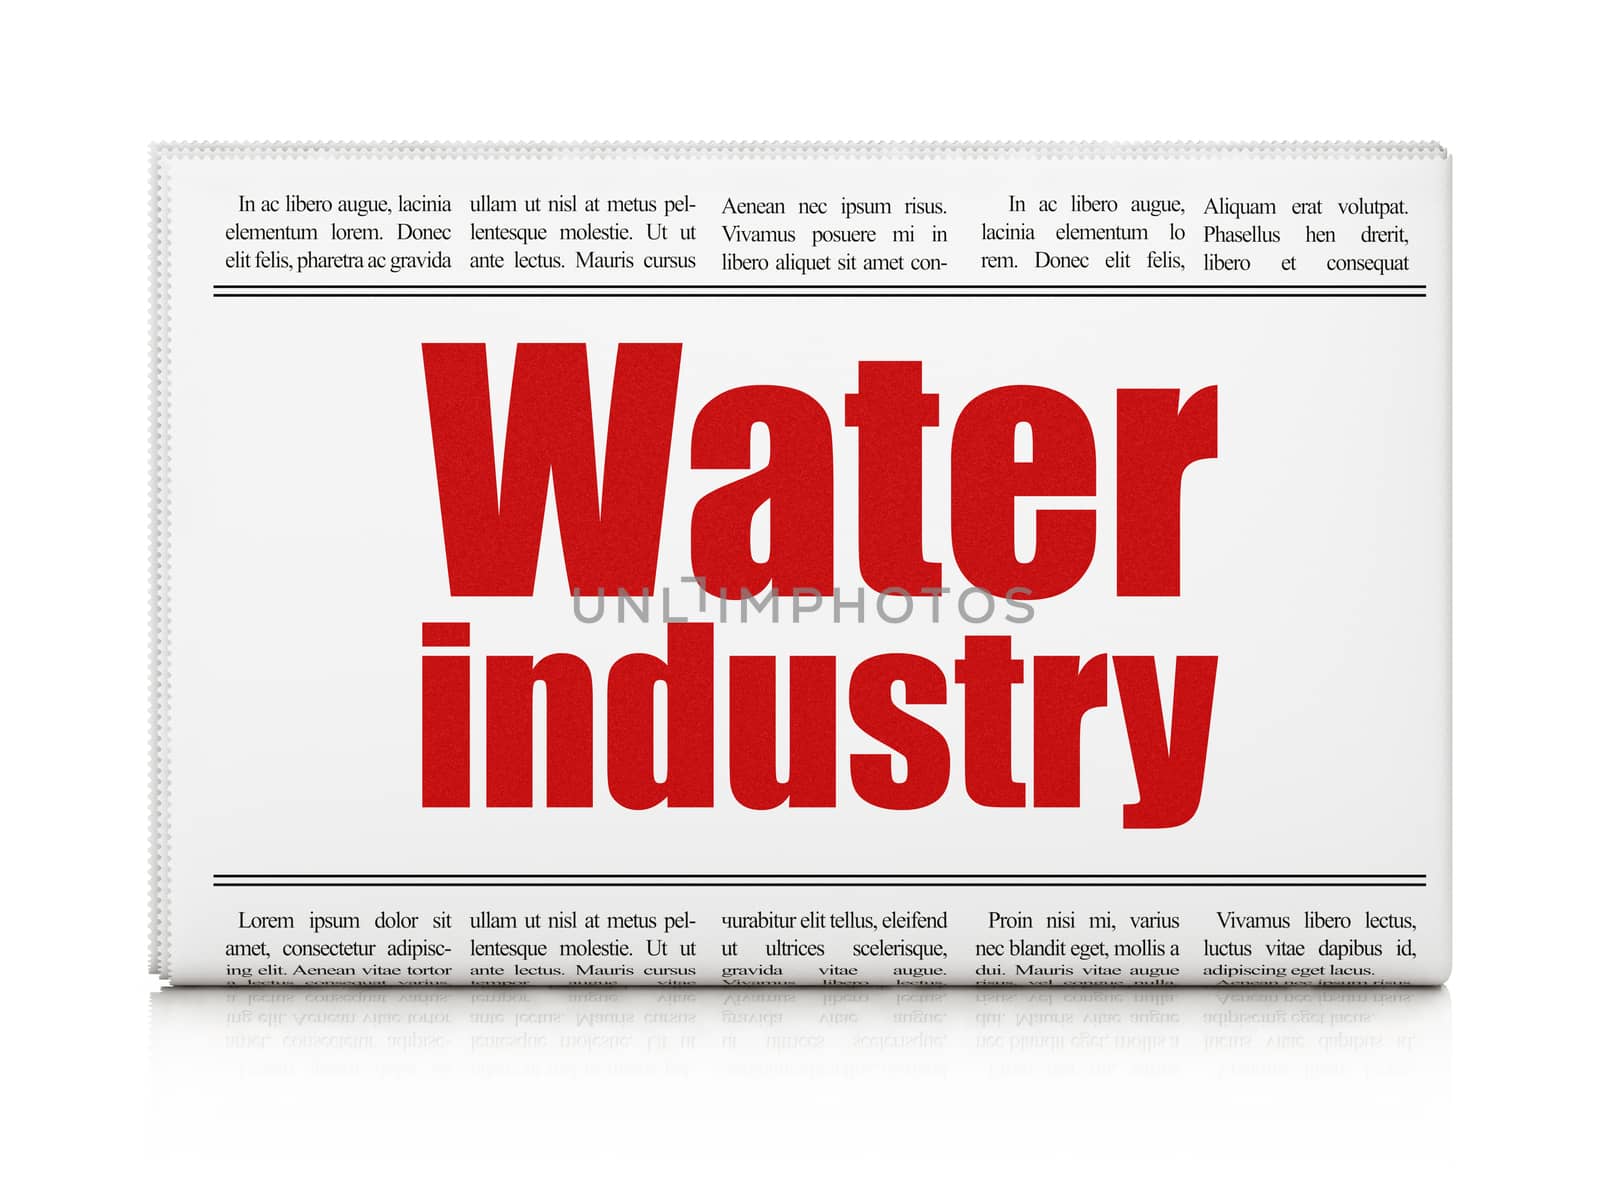 Manufacuring concept: newspaper headline Water Industry on White background, 3d render